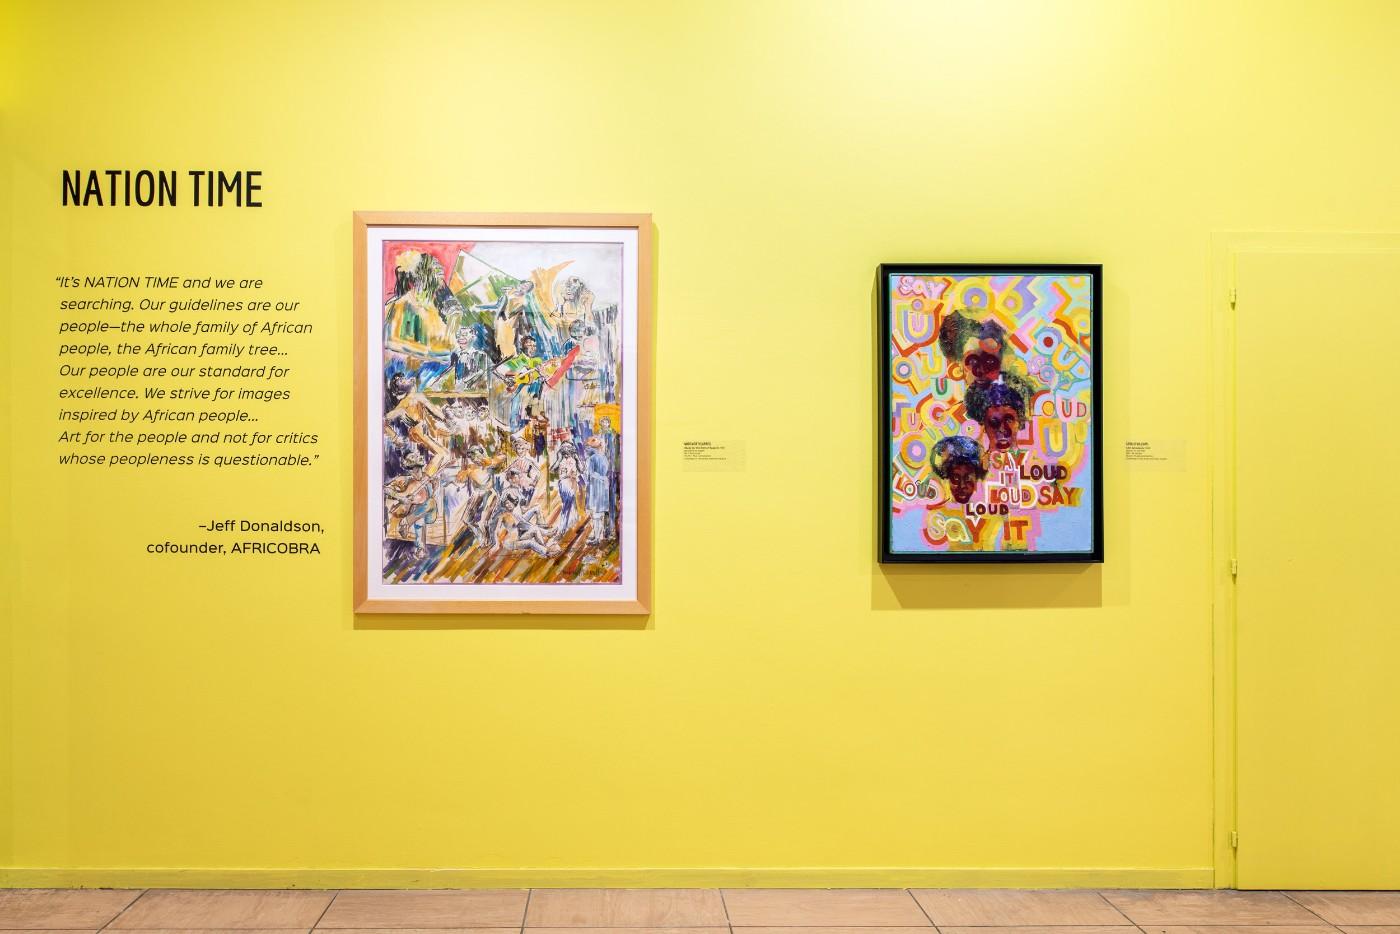 AFRICOBRA: Nation Time (installation view), 2019, Venice Biennale, Venice, Italy